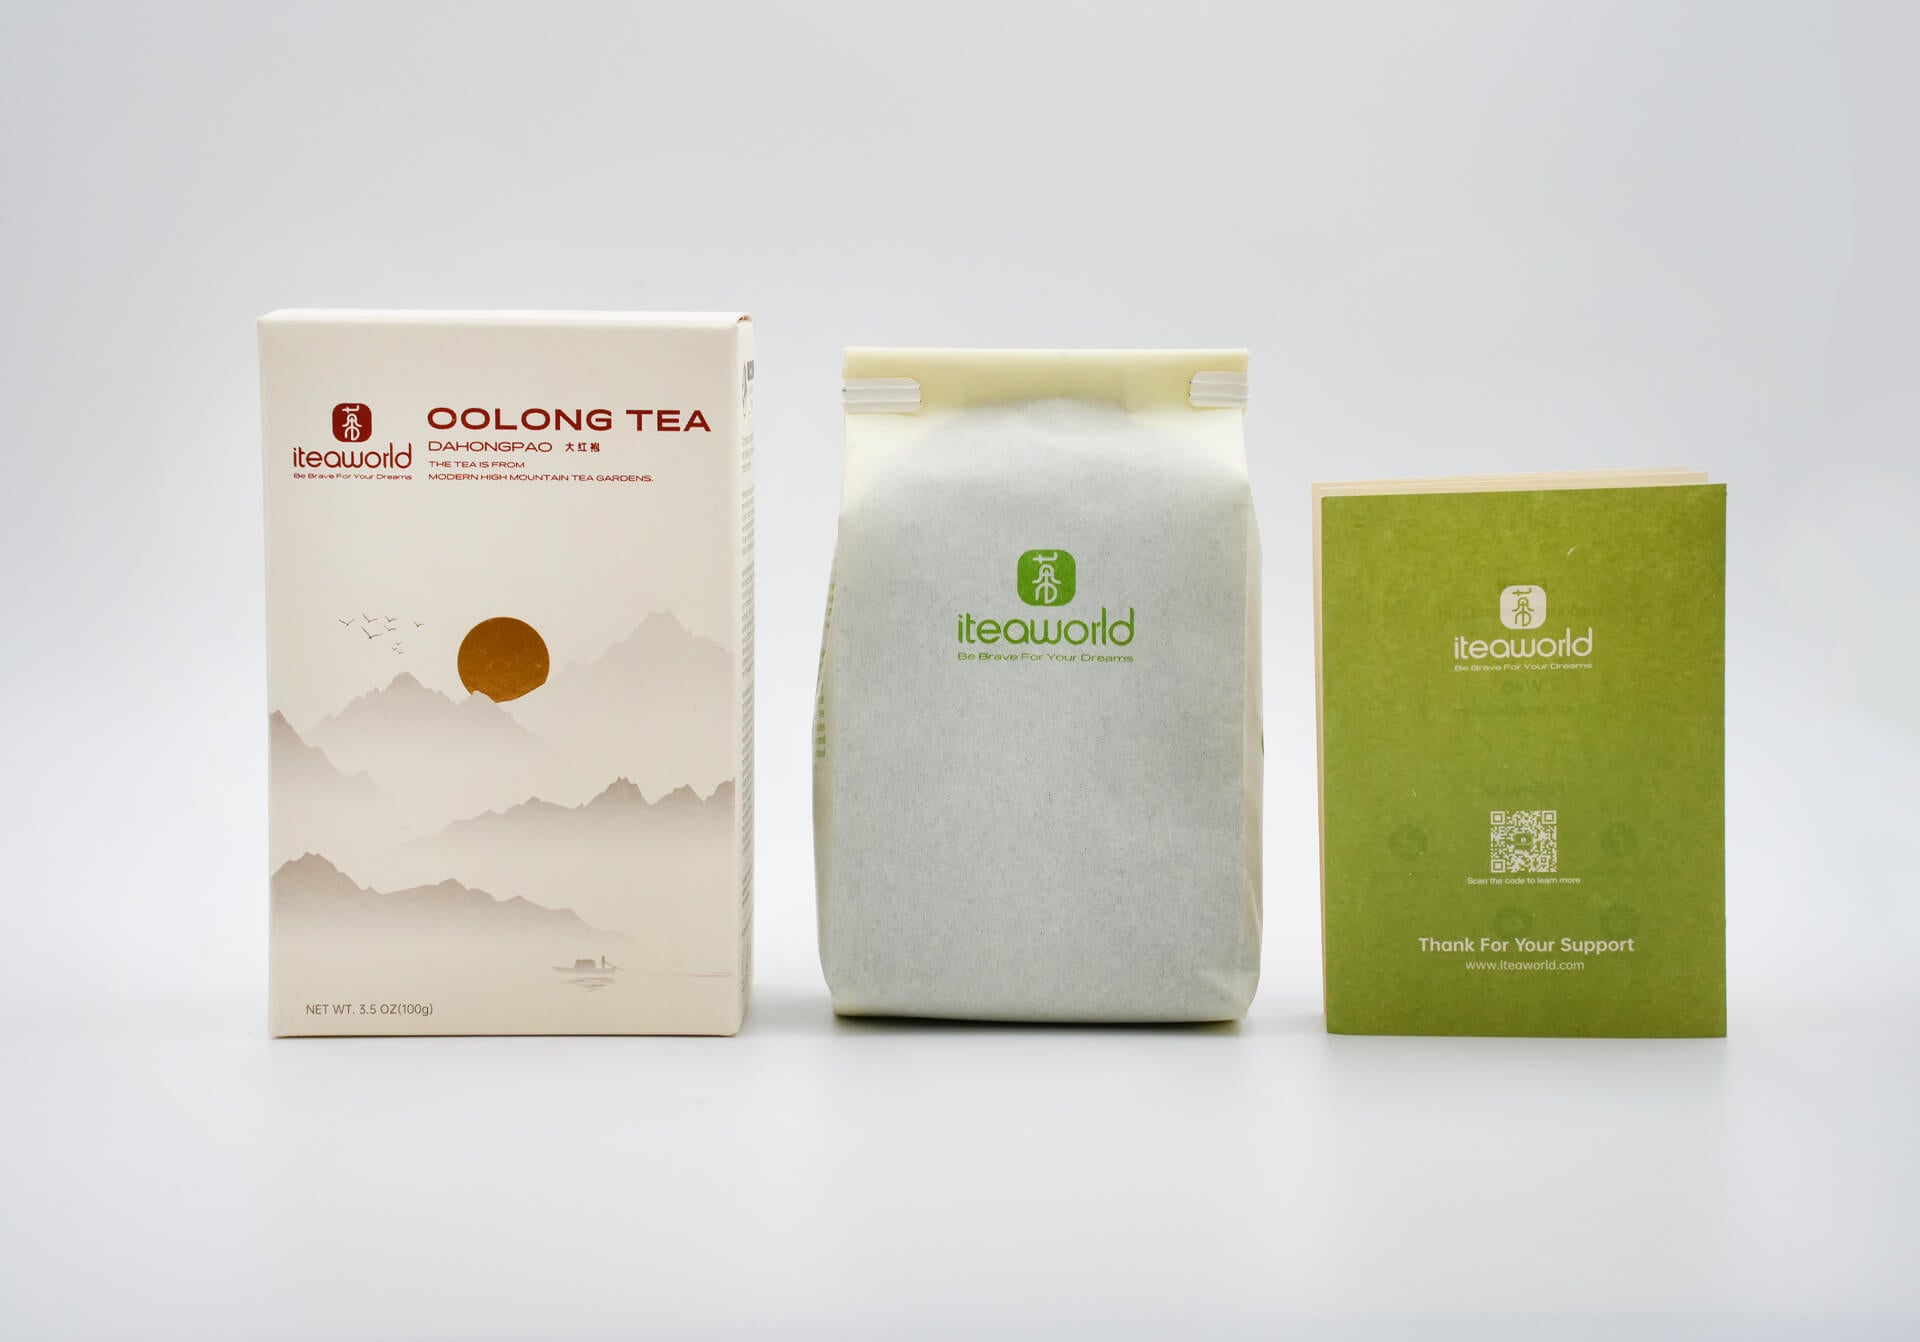 Product-packaging-and-product-details-dahongpao